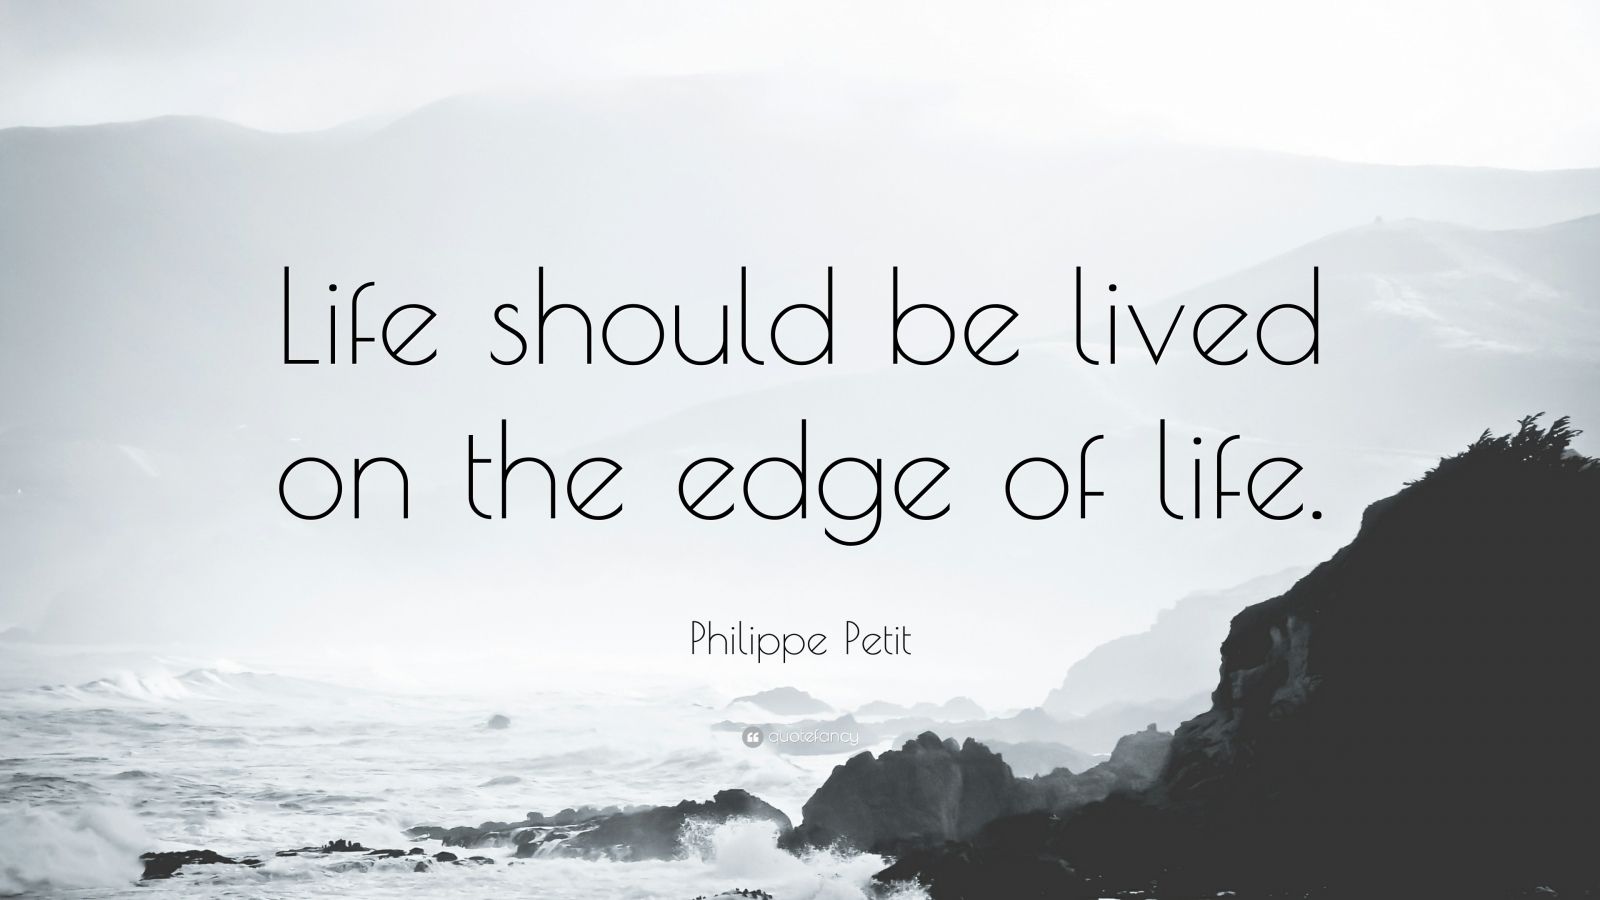 Philippe Petit Quote Life Should Be Lived On The Edge Of Life 12 Wallpapers Quotefancy